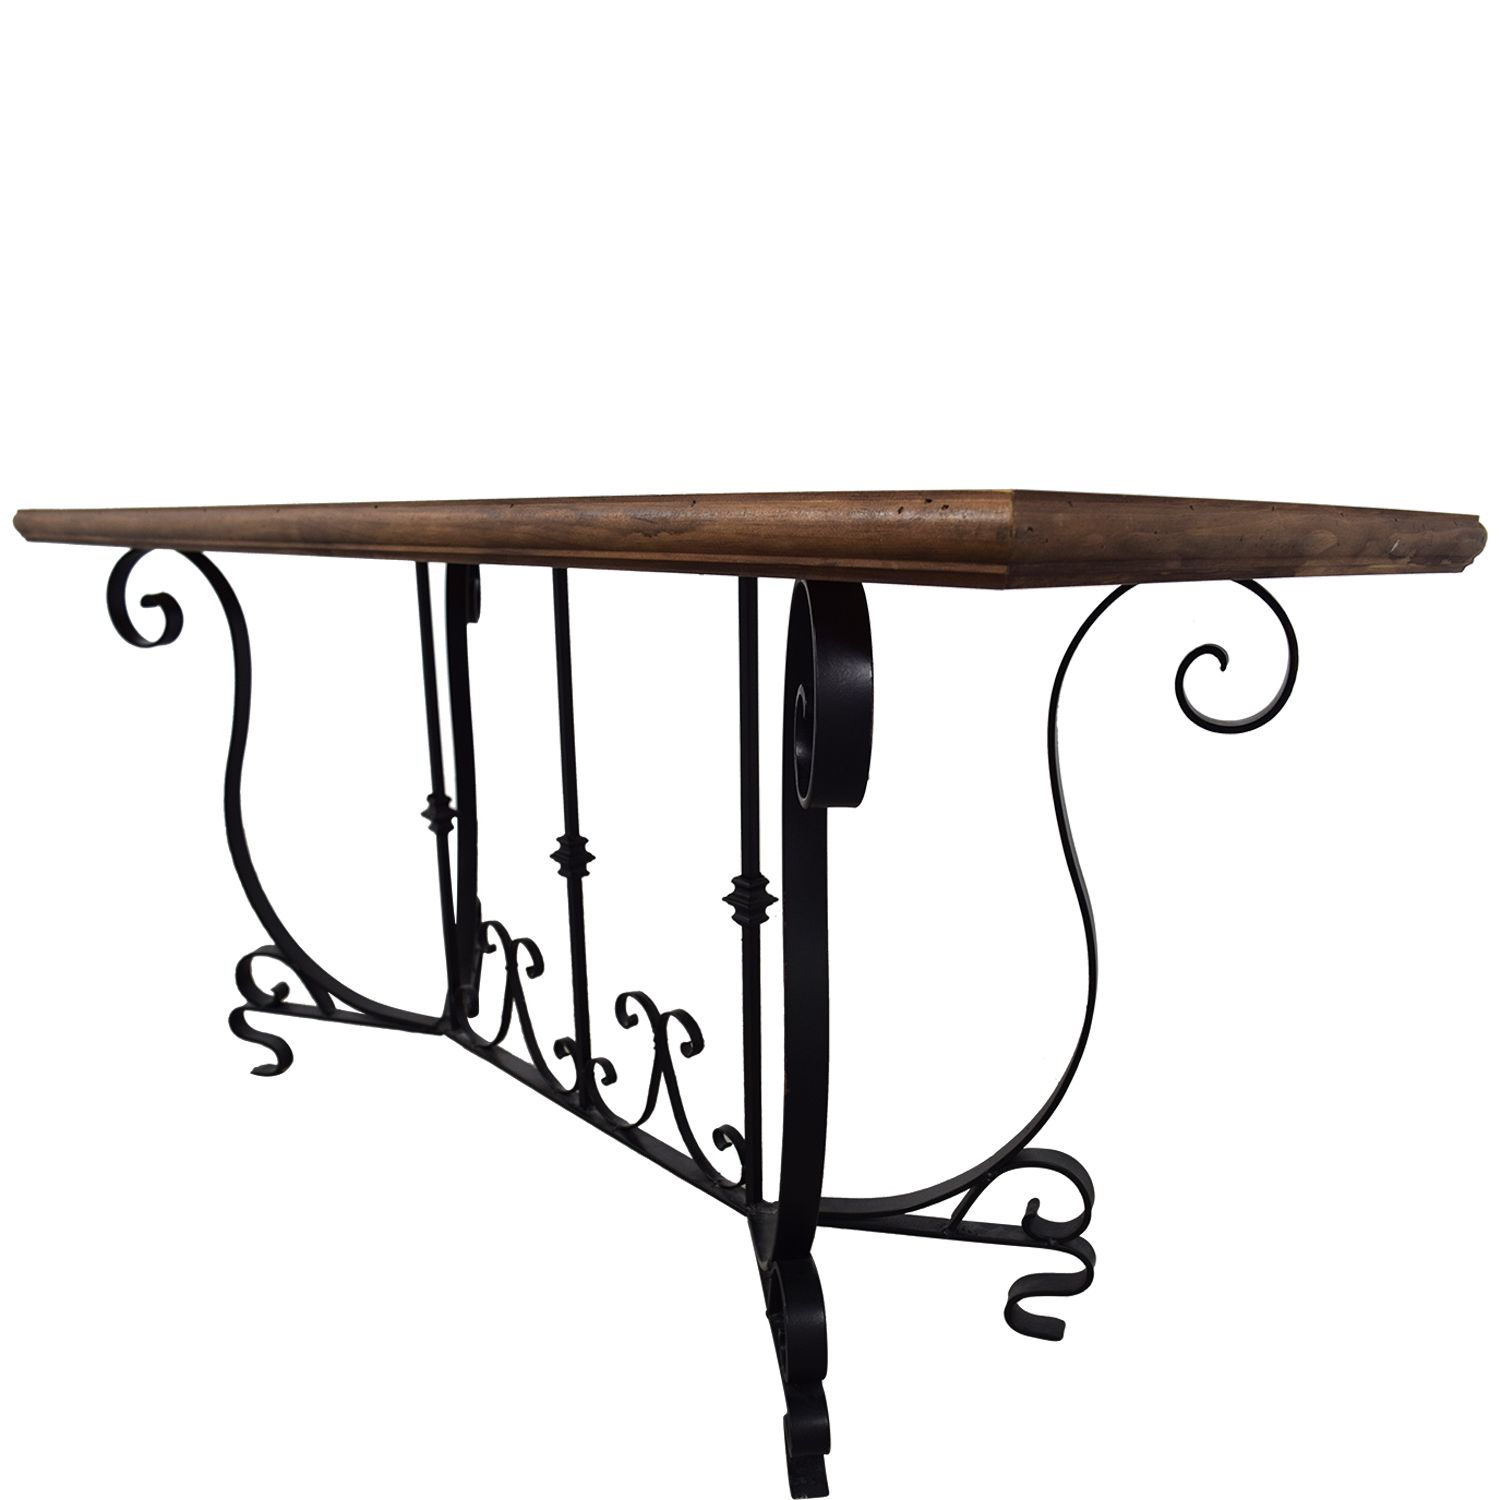 [%90% Off – Black Iron Scroll Base And Rustic Wood Console Regarding Current Aged Black Iron Console Tables|aged Black Iron Console Tables With Regard To Trendy 90% Off – Black Iron Scroll Base And Rustic Wood Console|best And Newest Aged Black Iron Console Tables Within 90% Off – Black Iron Scroll Base And Rustic Wood Console|most Popular 90% Off – Black Iron Scroll Base And Rustic Wood Console Inside Aged Black Iron Console Tables%] (View 6 of 10)